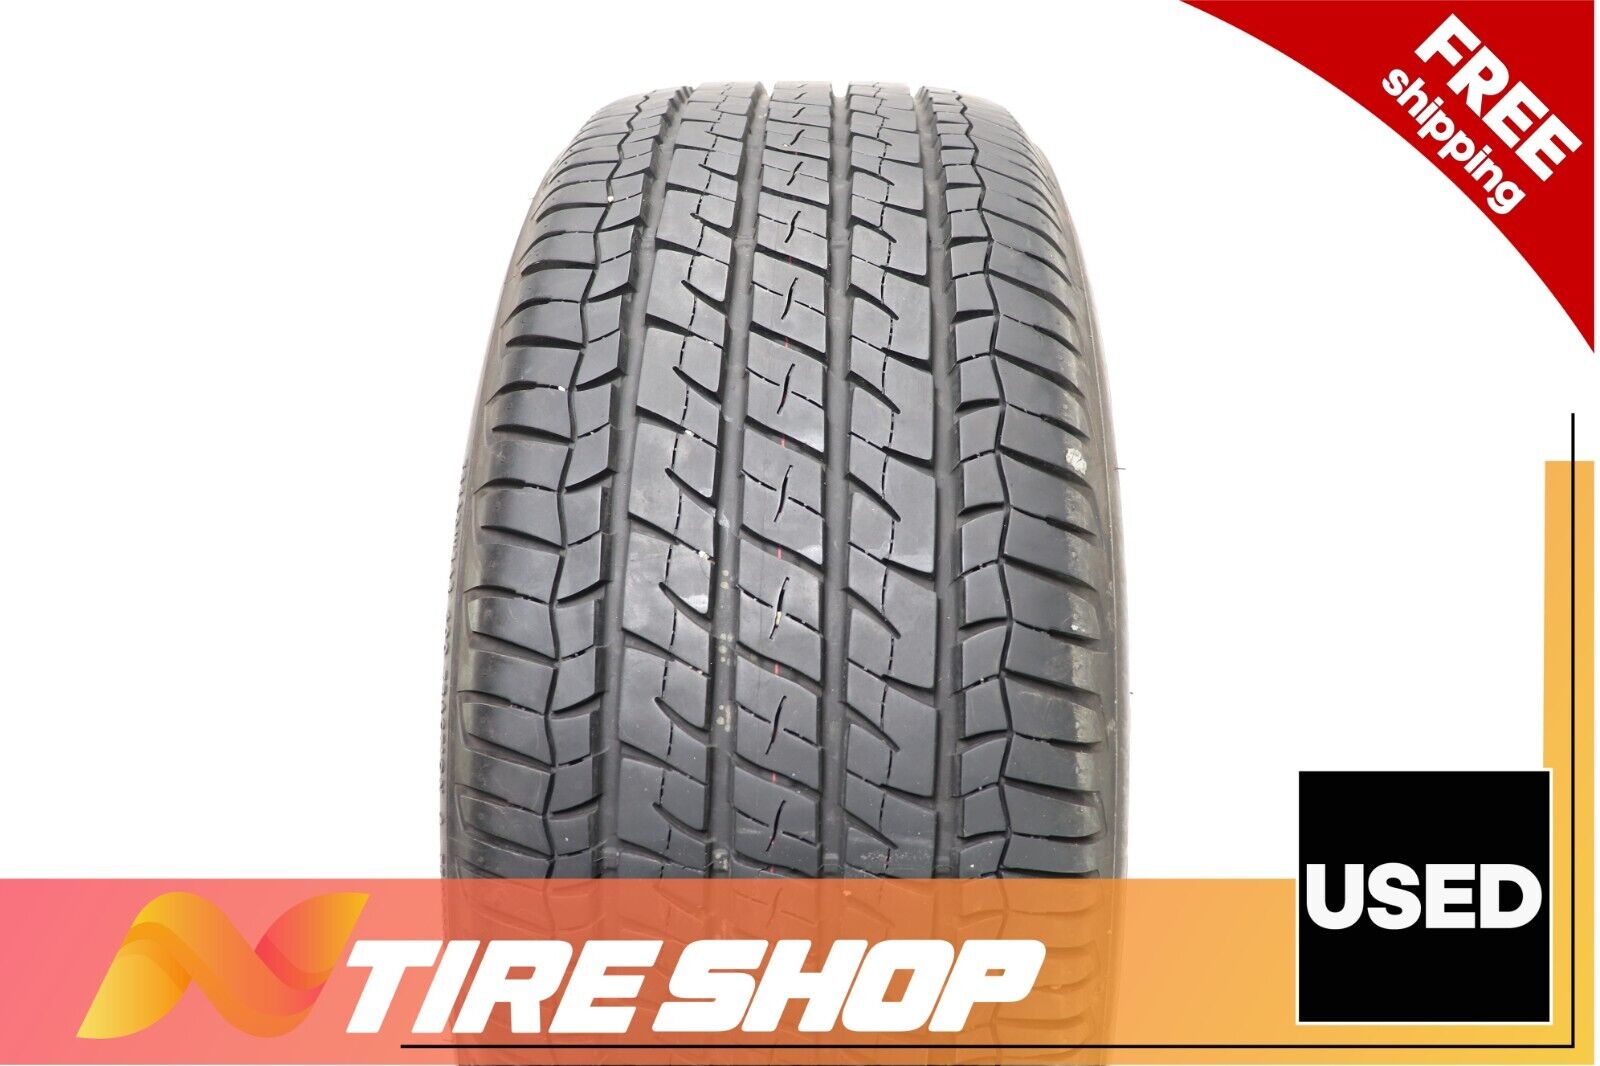 Used 215/55R16 Firestone Champion Fuel Fighter - 93H - 8/32 No Repairs